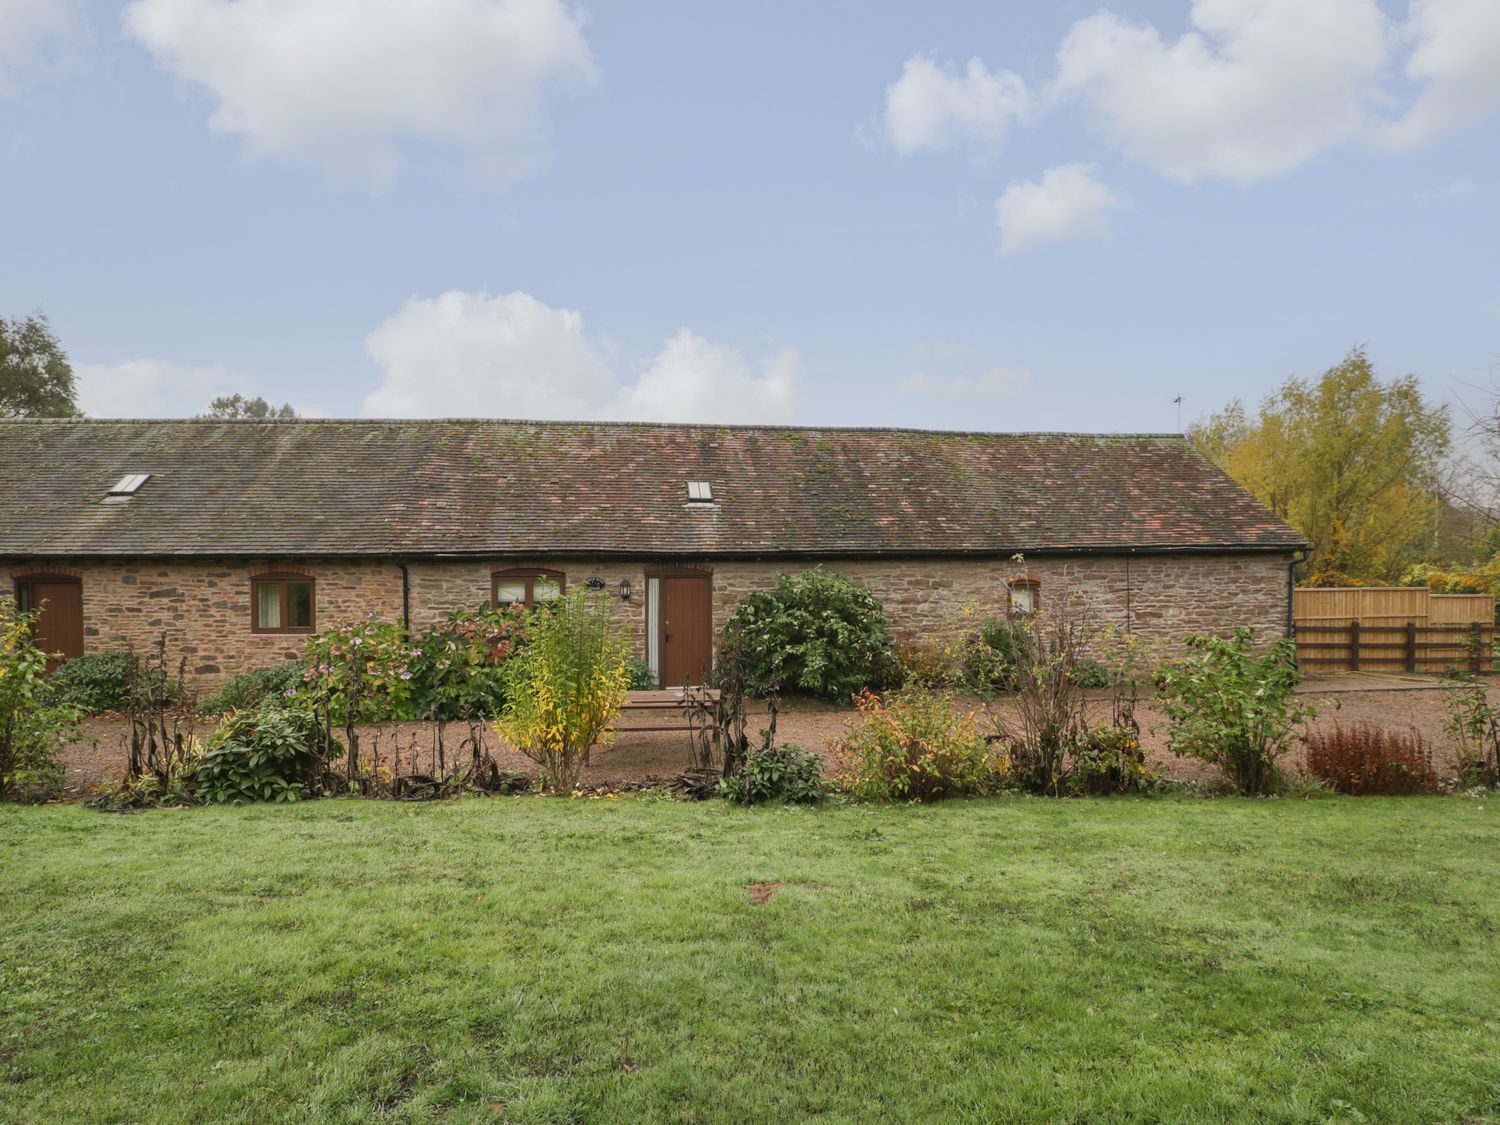 Clover Patch Cottage - Herefordshire - 1121500 - photo 1